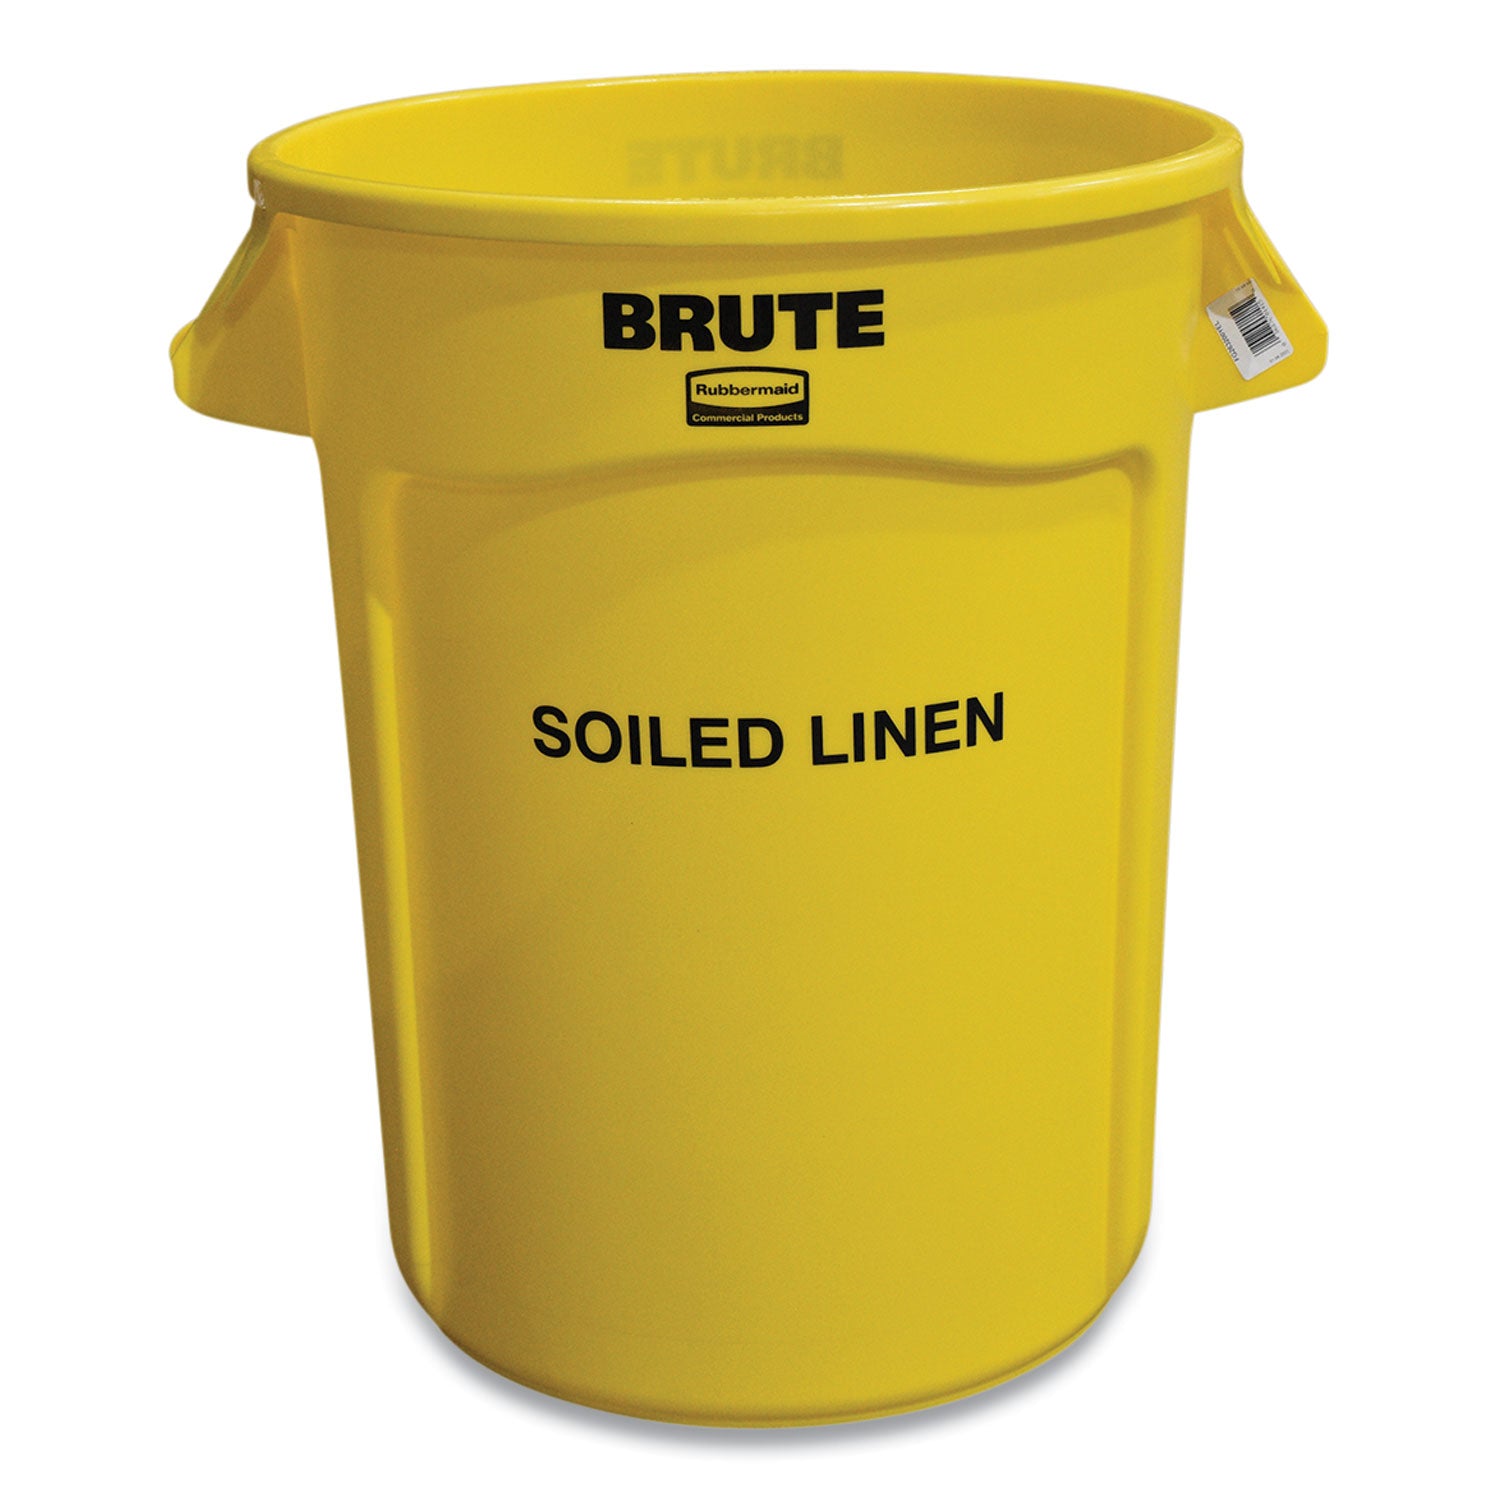 vented-round-brute-container-soiled-linen-imprint-32-gal-plastic-yellow_rcp263294yel - 2